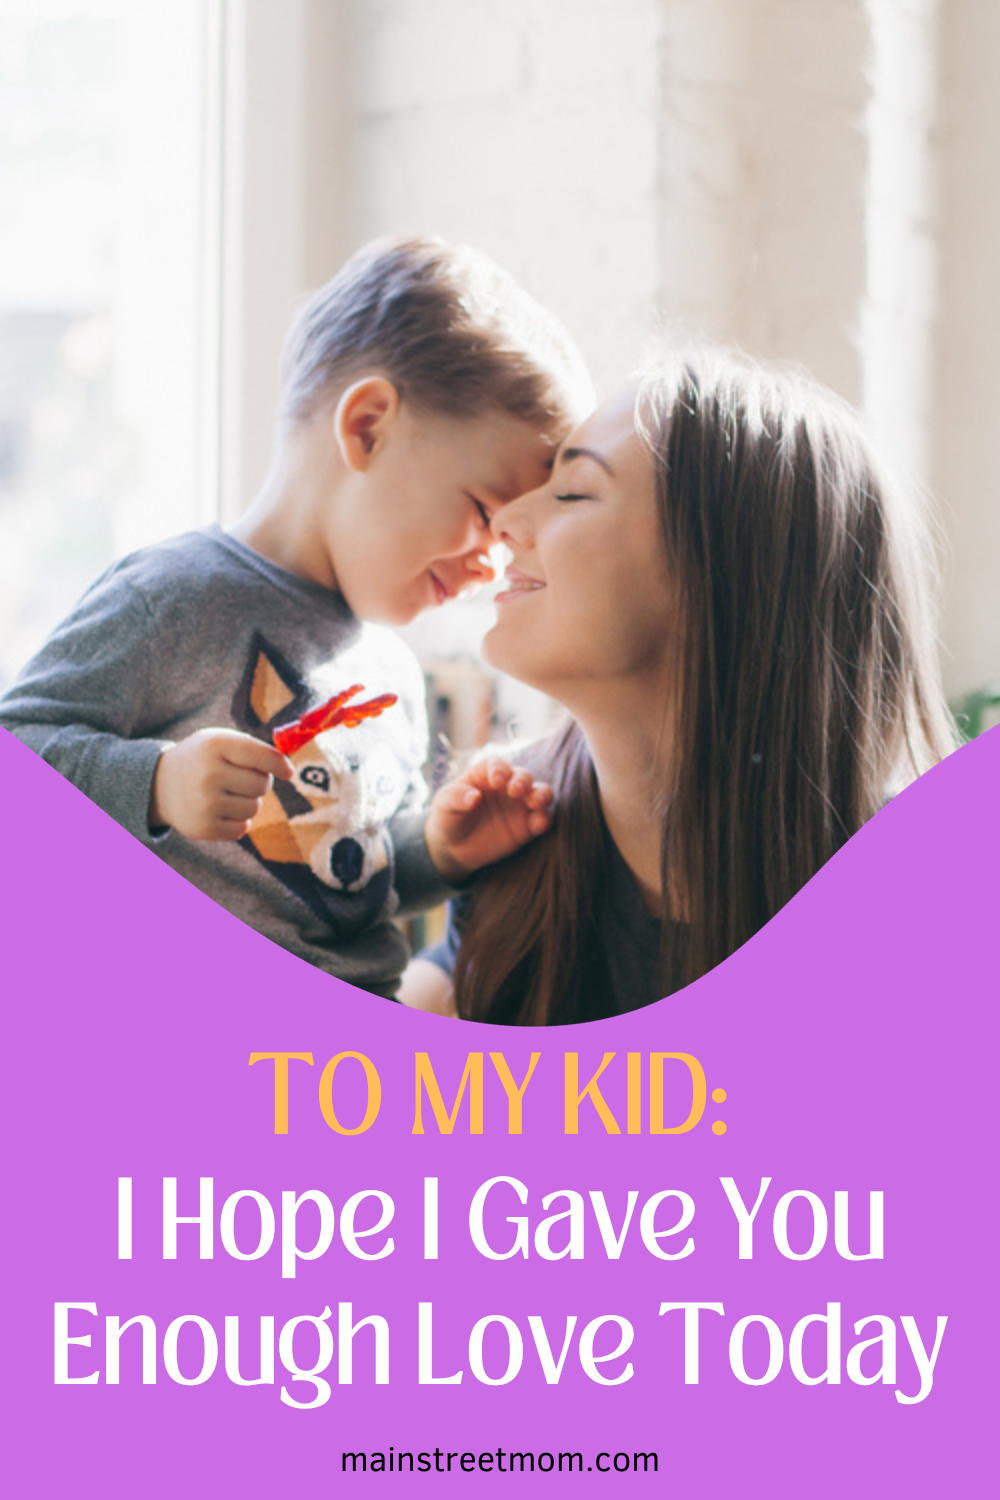 To My Kid: I Hope I Gave You Enough Love Today